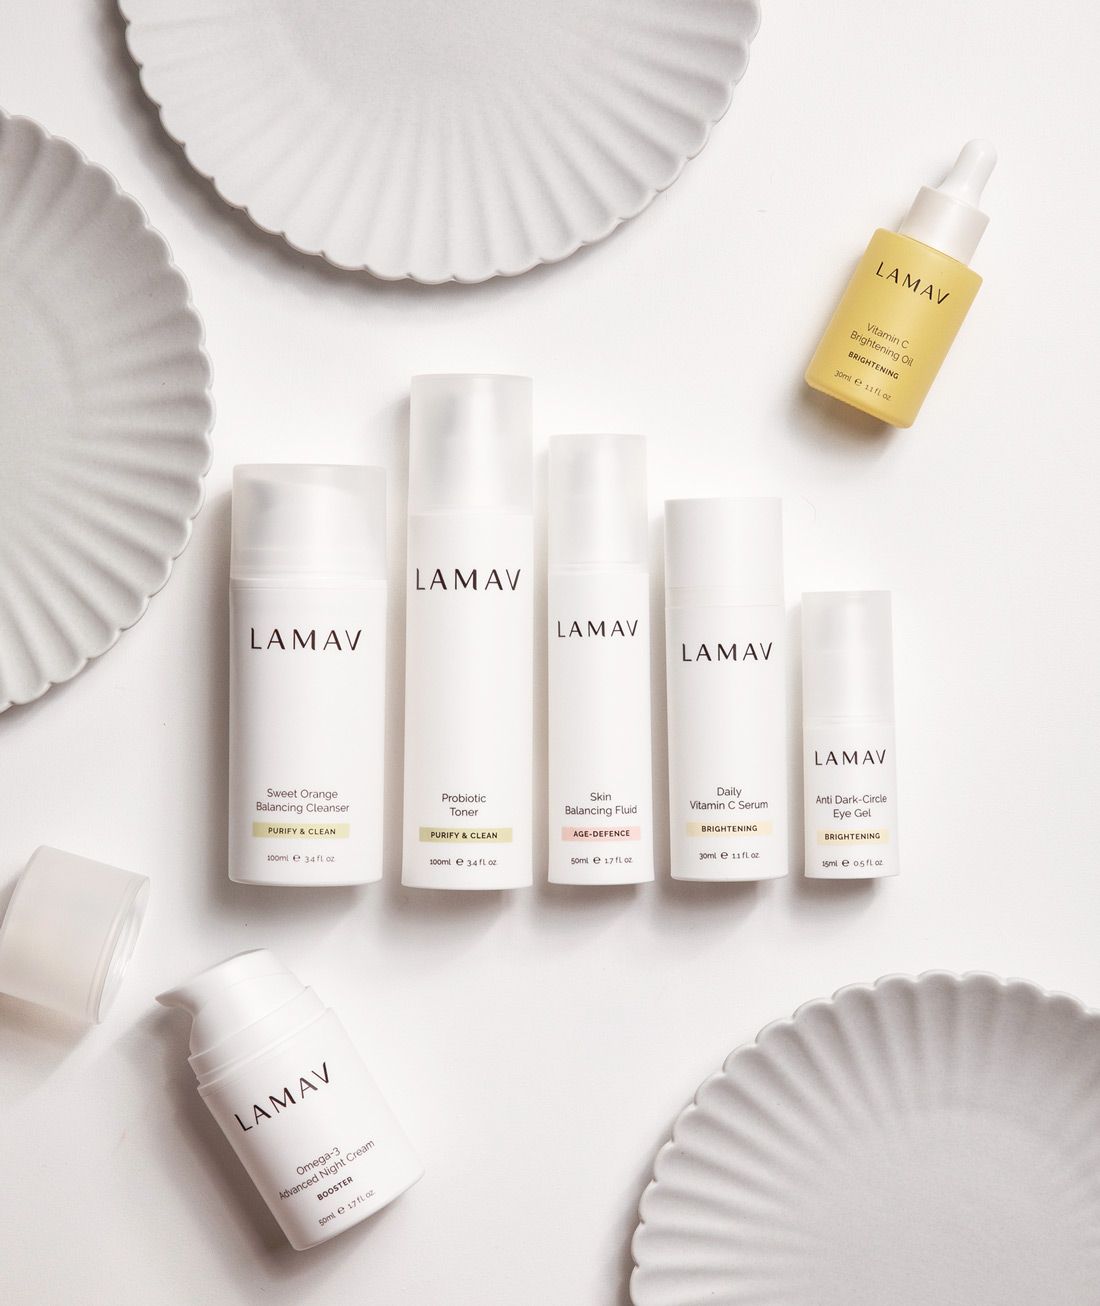 Win a LAMAV skincare collection this September